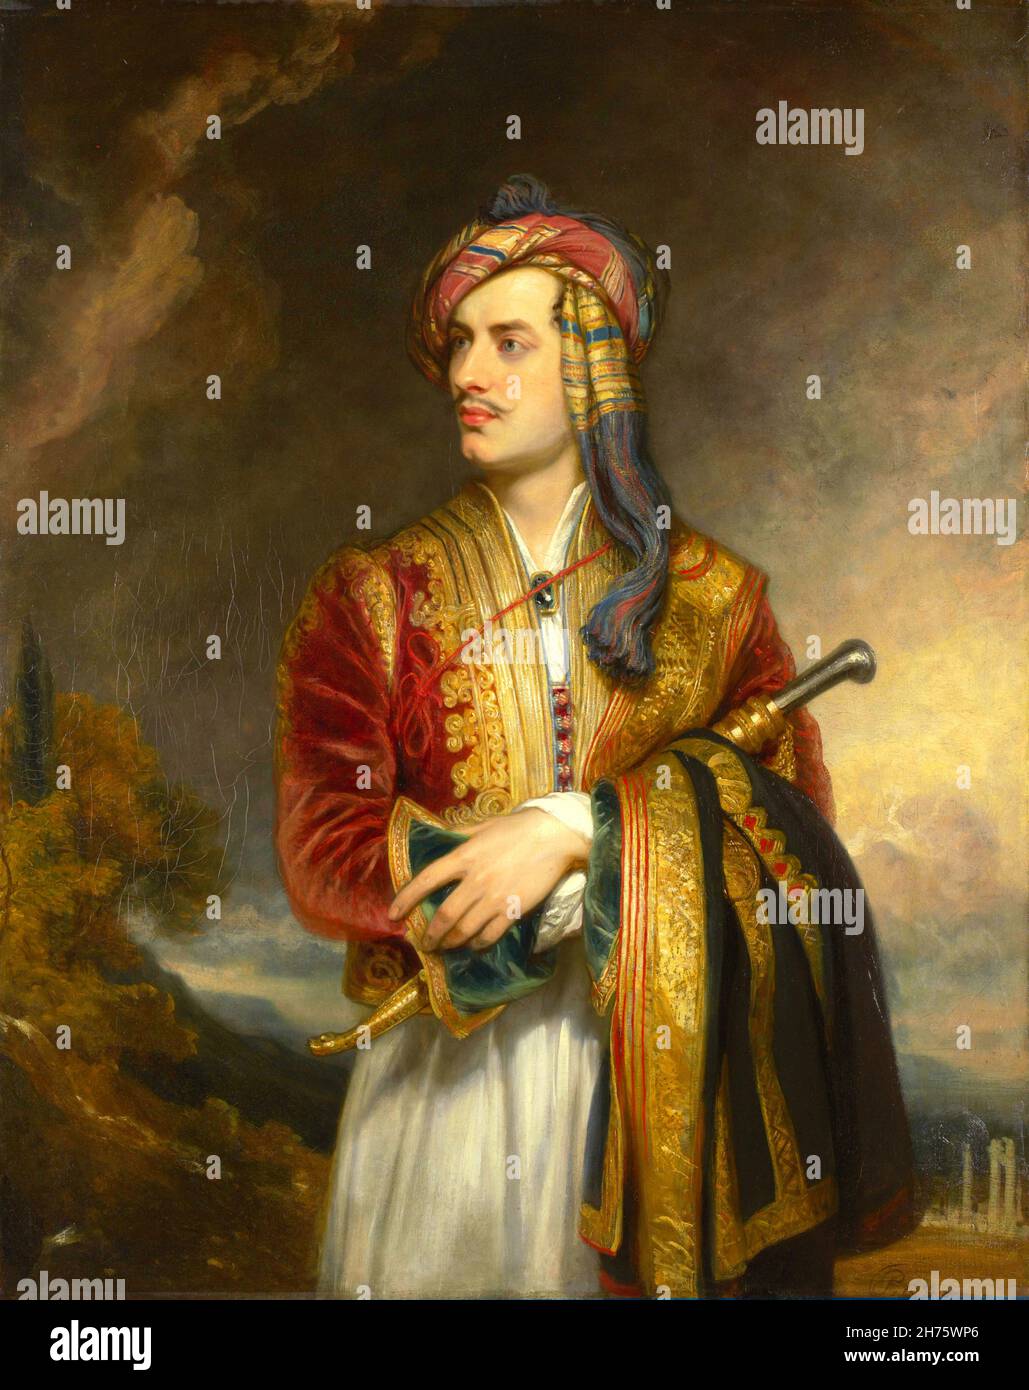 Thomas Phillips portrait of Lord Byron in Albanian Dress - 1813 Stock Photo